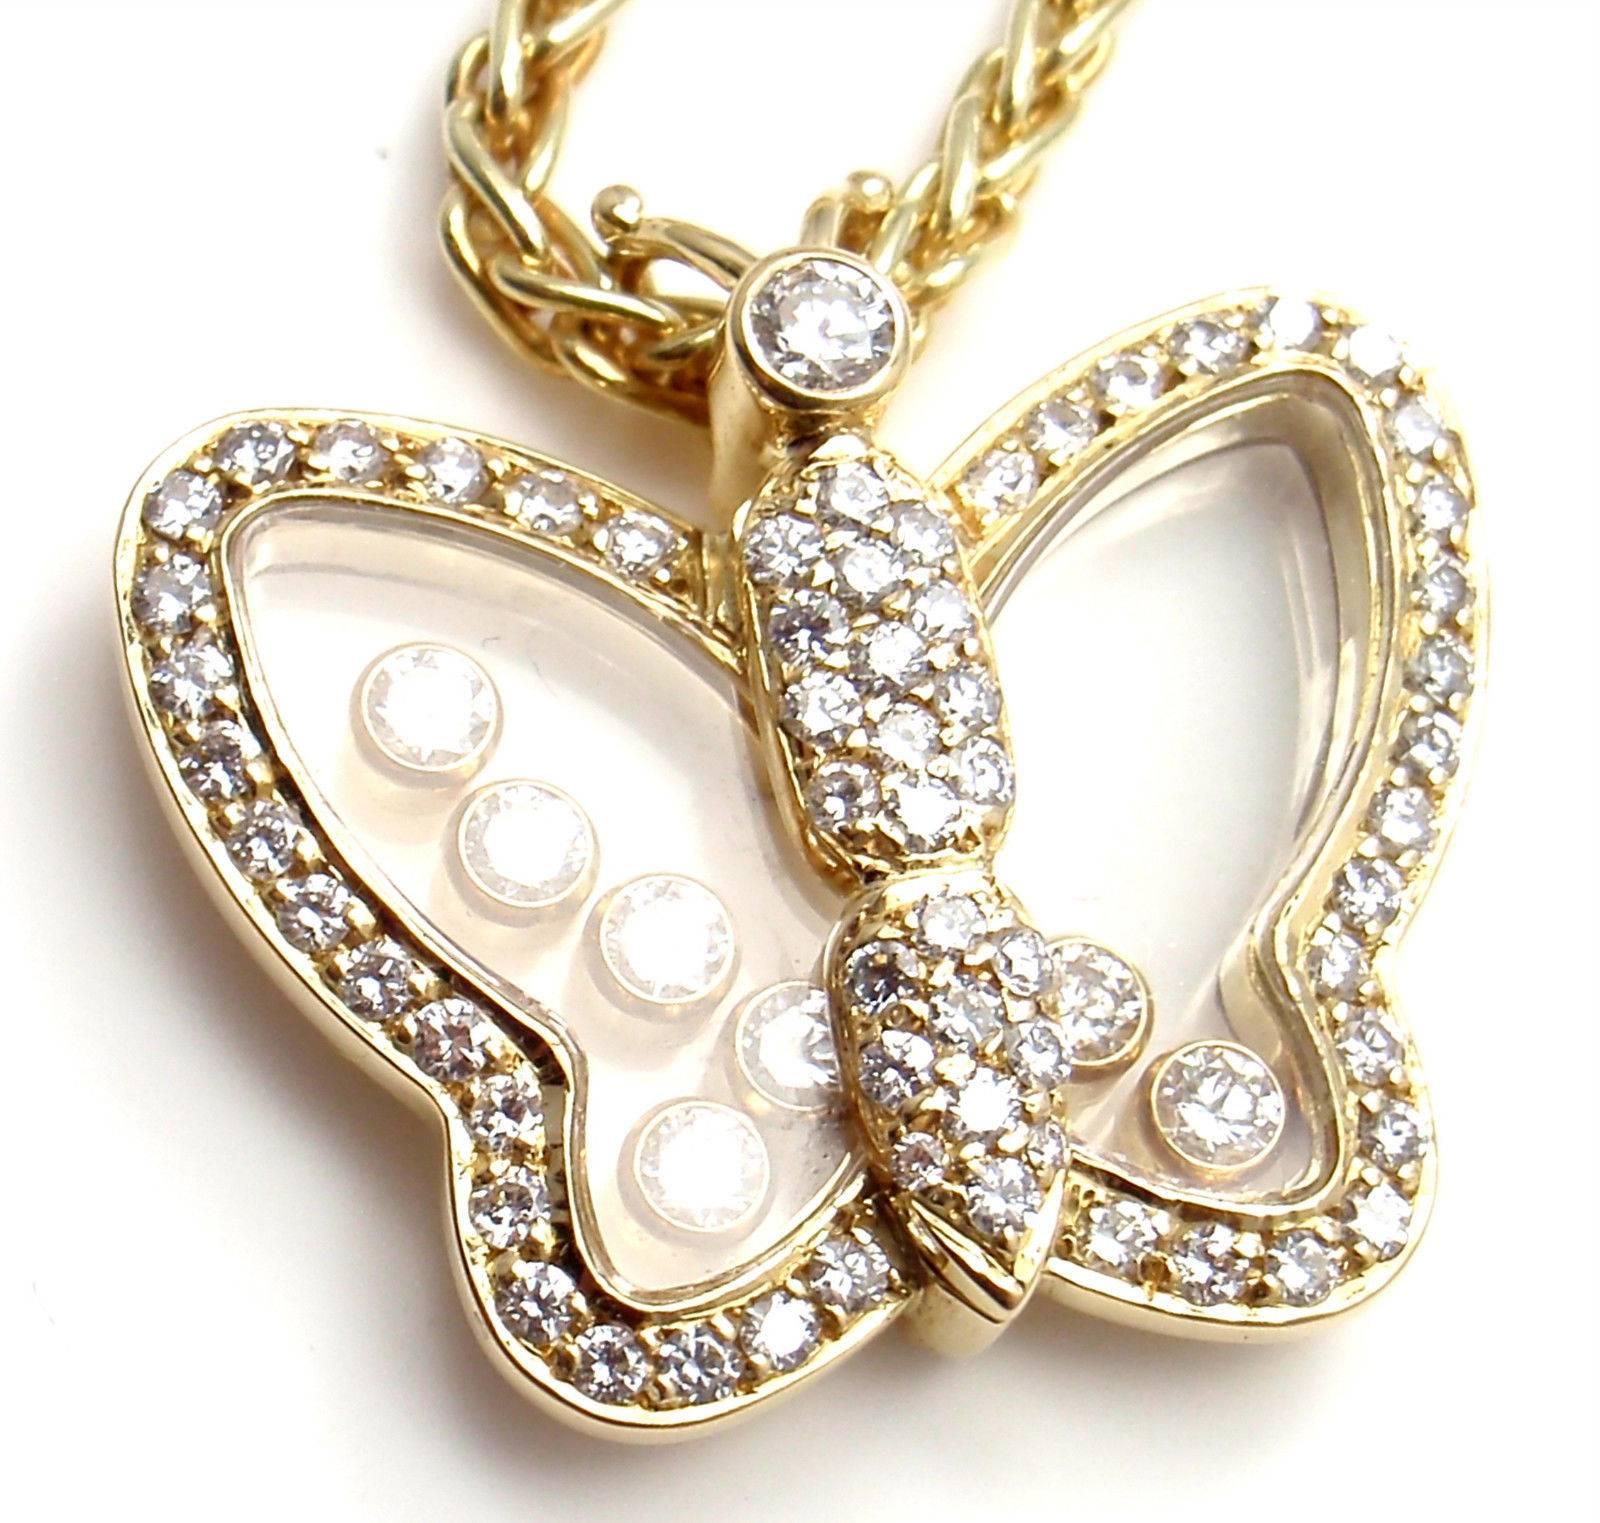 18k Yellow Gold Happy Diamond Butterfly Pendant Necklace by Chopard. 
With 72 Round Brilliant Cut Diamonds VS1 total weight approx. 1.5ct
Details: 
Length: 17